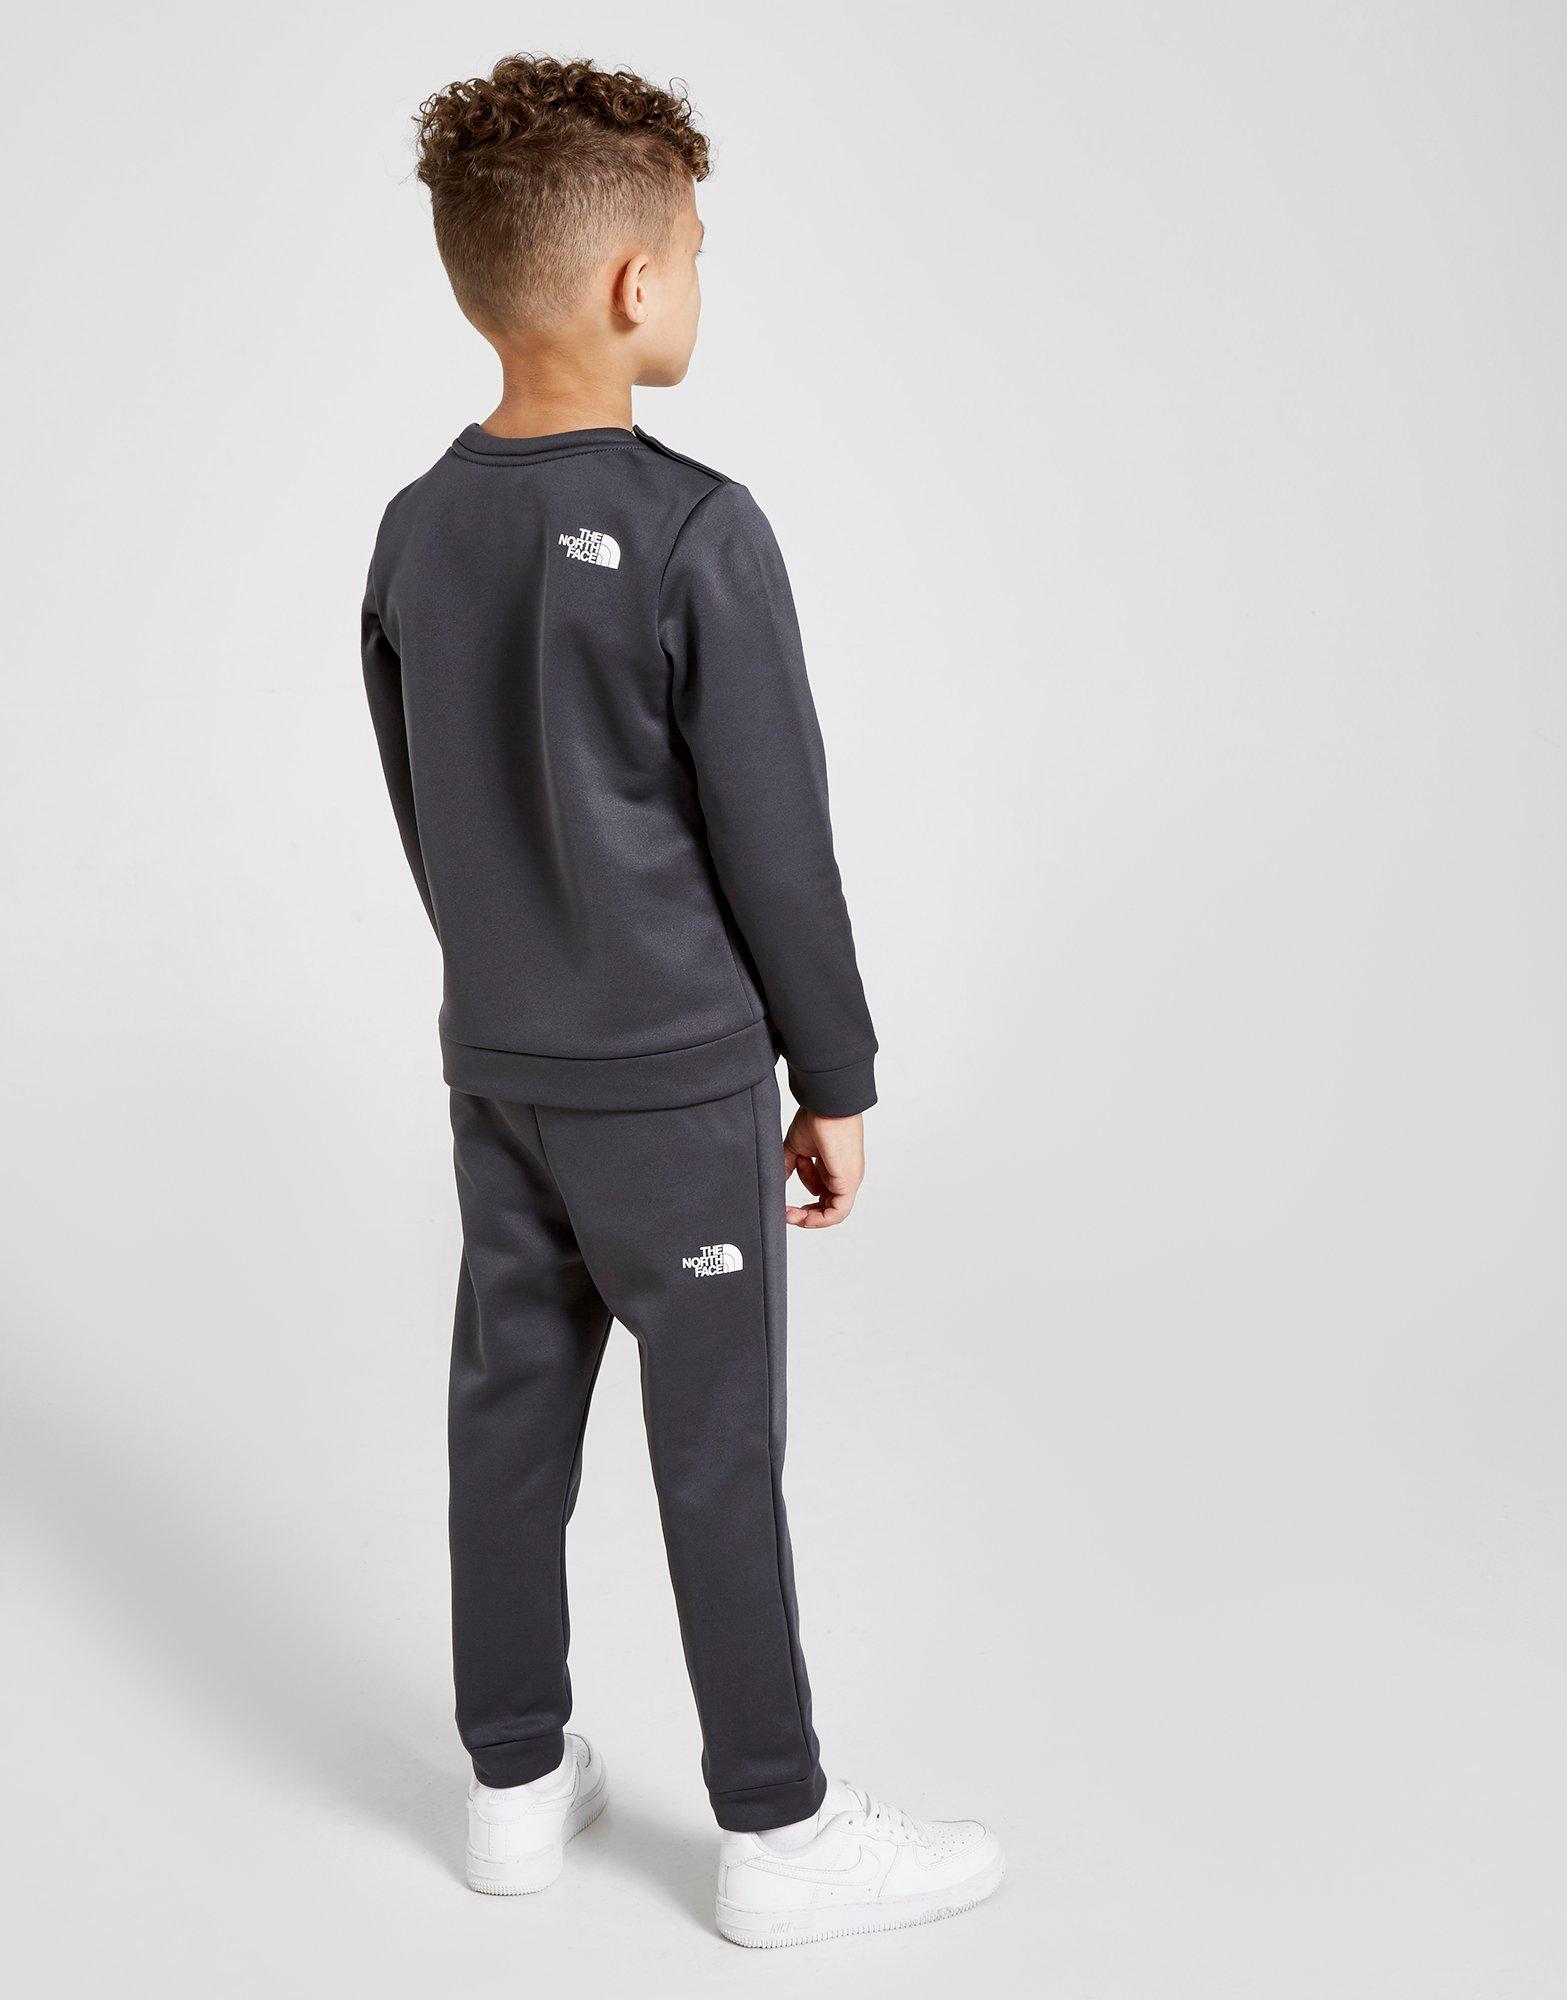 north face girls tracksuit